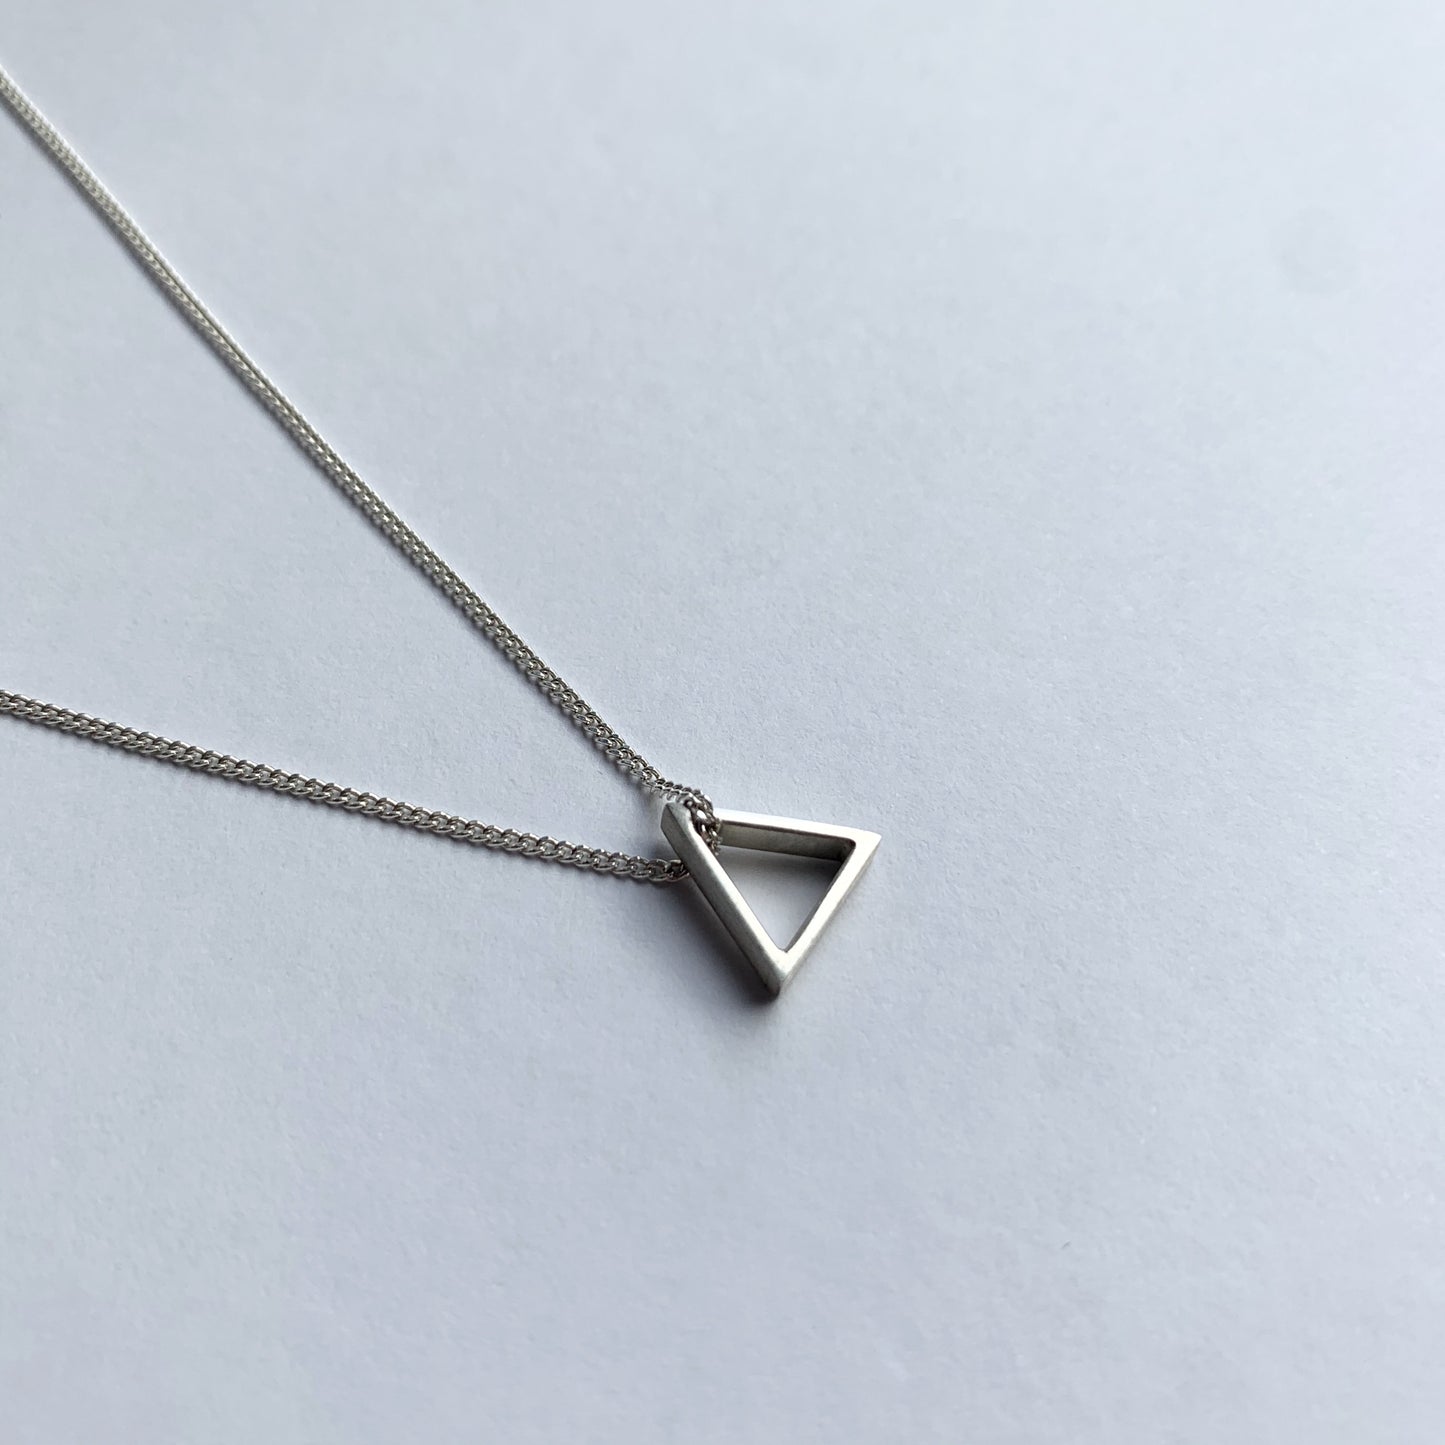 Small sterling silver 3D triangle on chain